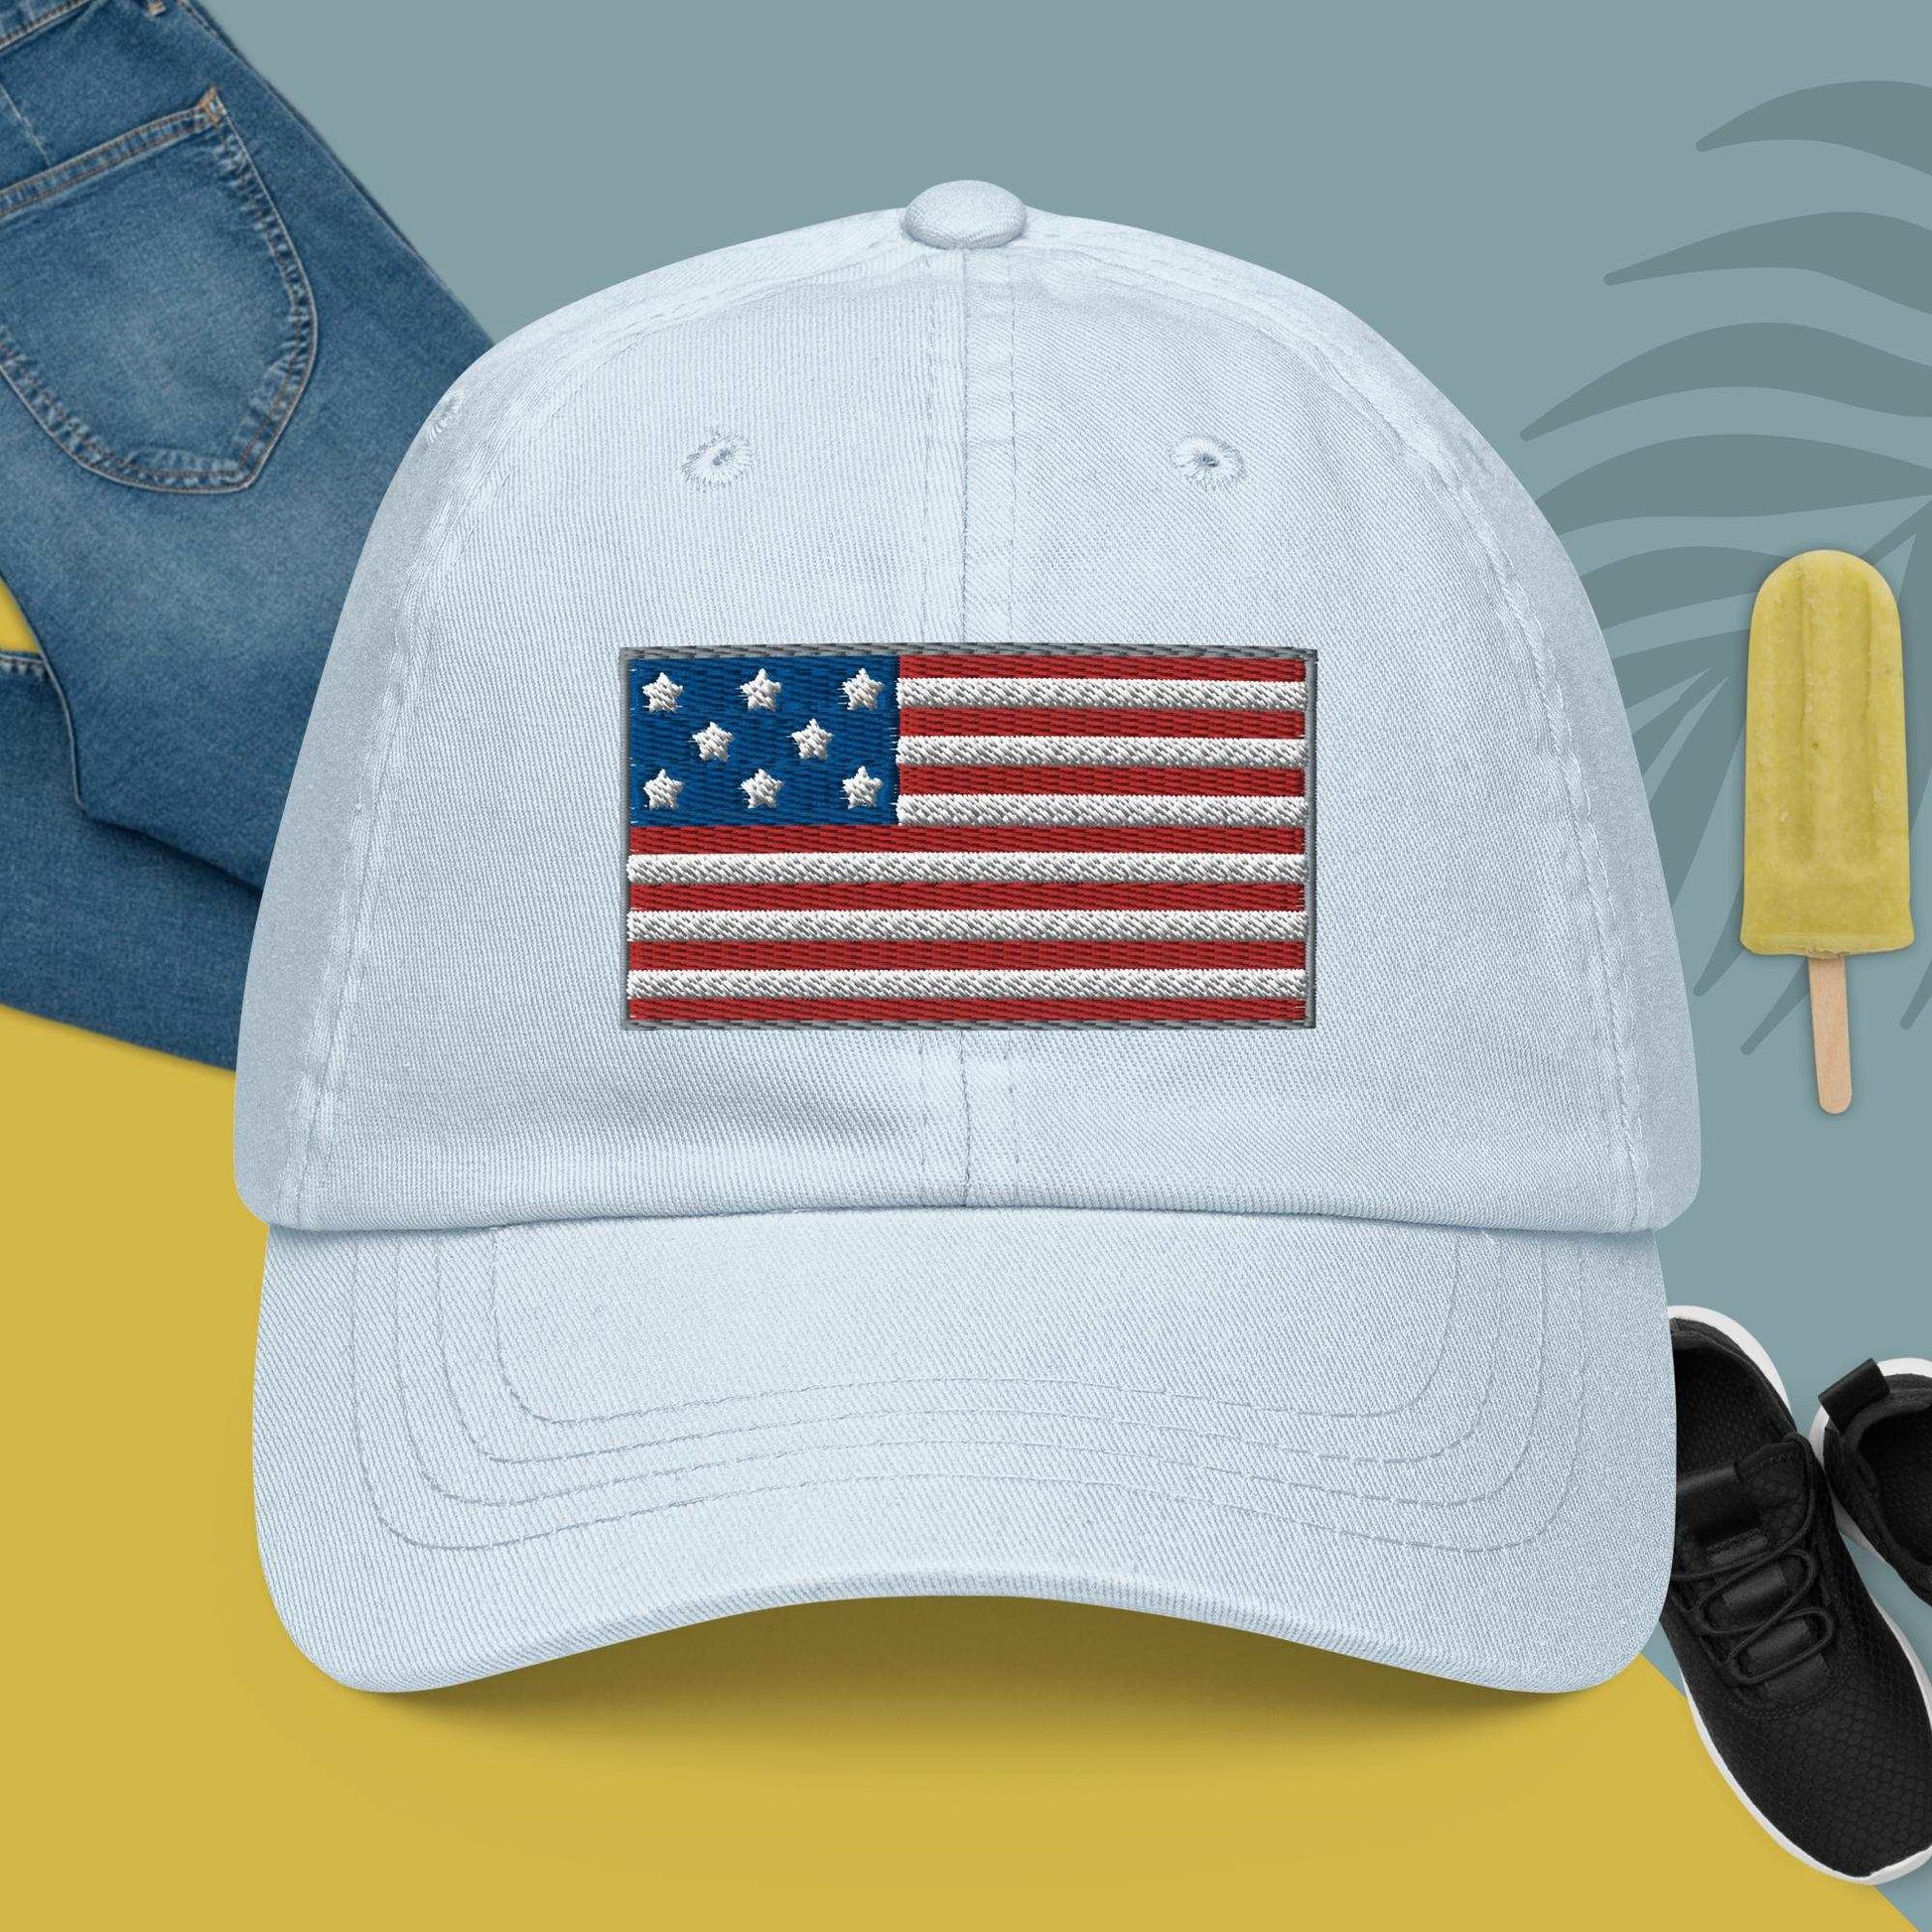 Express Your Patriotism with Style: U.S. Flag Pastel Baseball Hat - Stand Out in Red, White, and Blue! - Lizard Vigilante